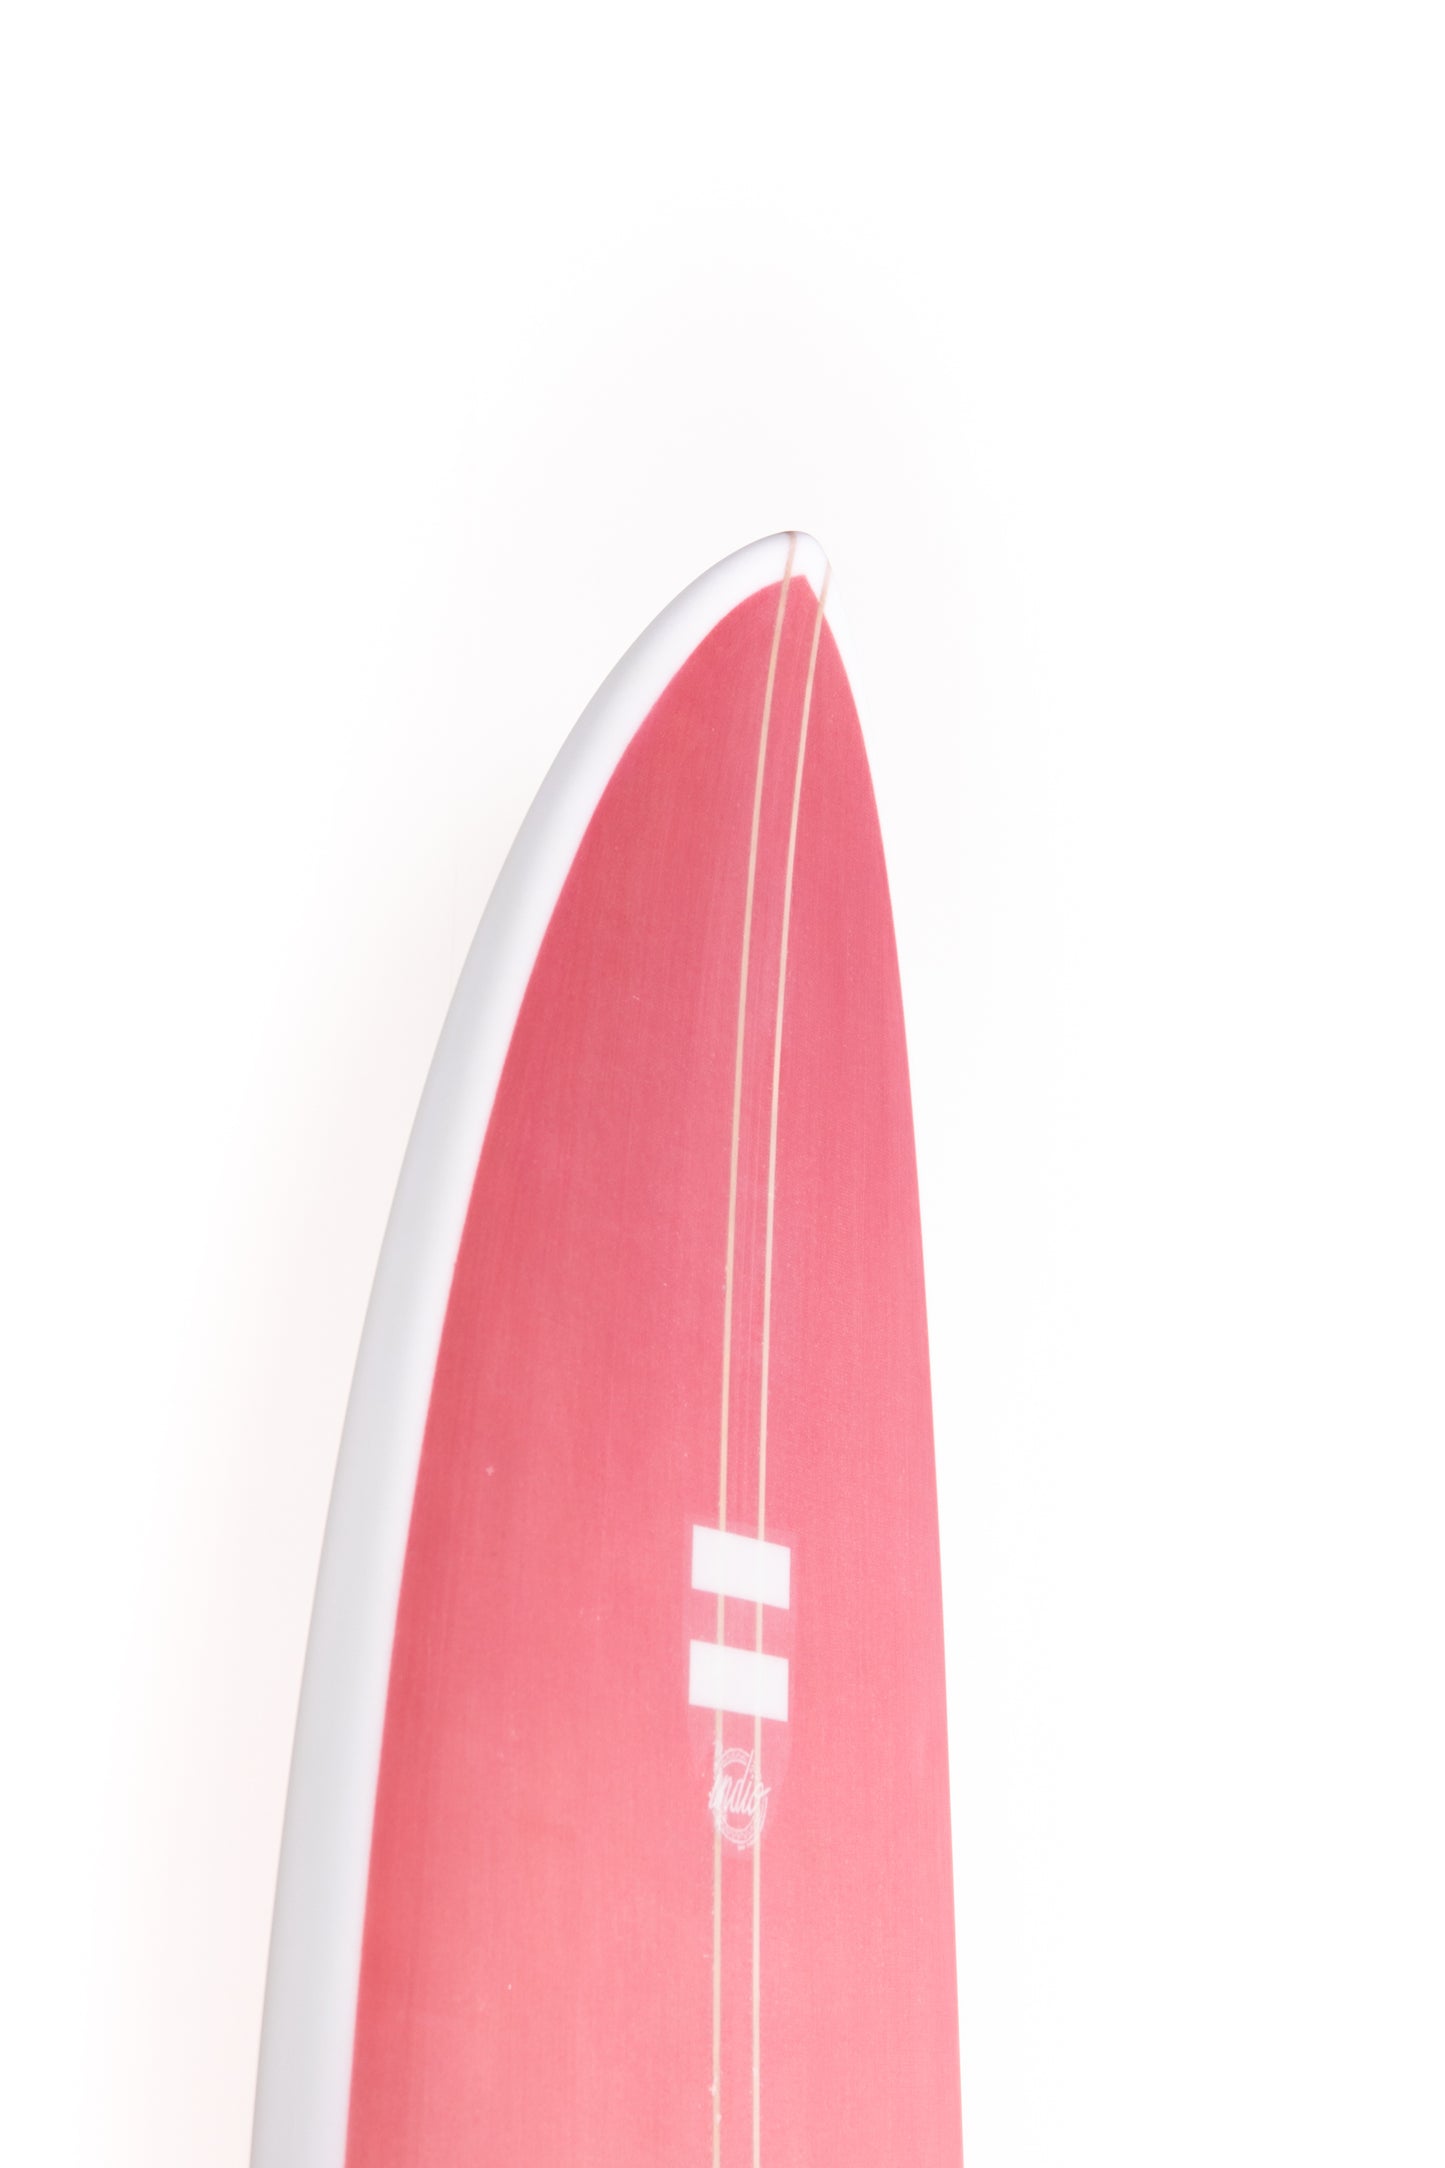 
                  
                    Pukas-Surf-Shop-Indio-Surfboards-The-Egg-red-7_6
                  
                